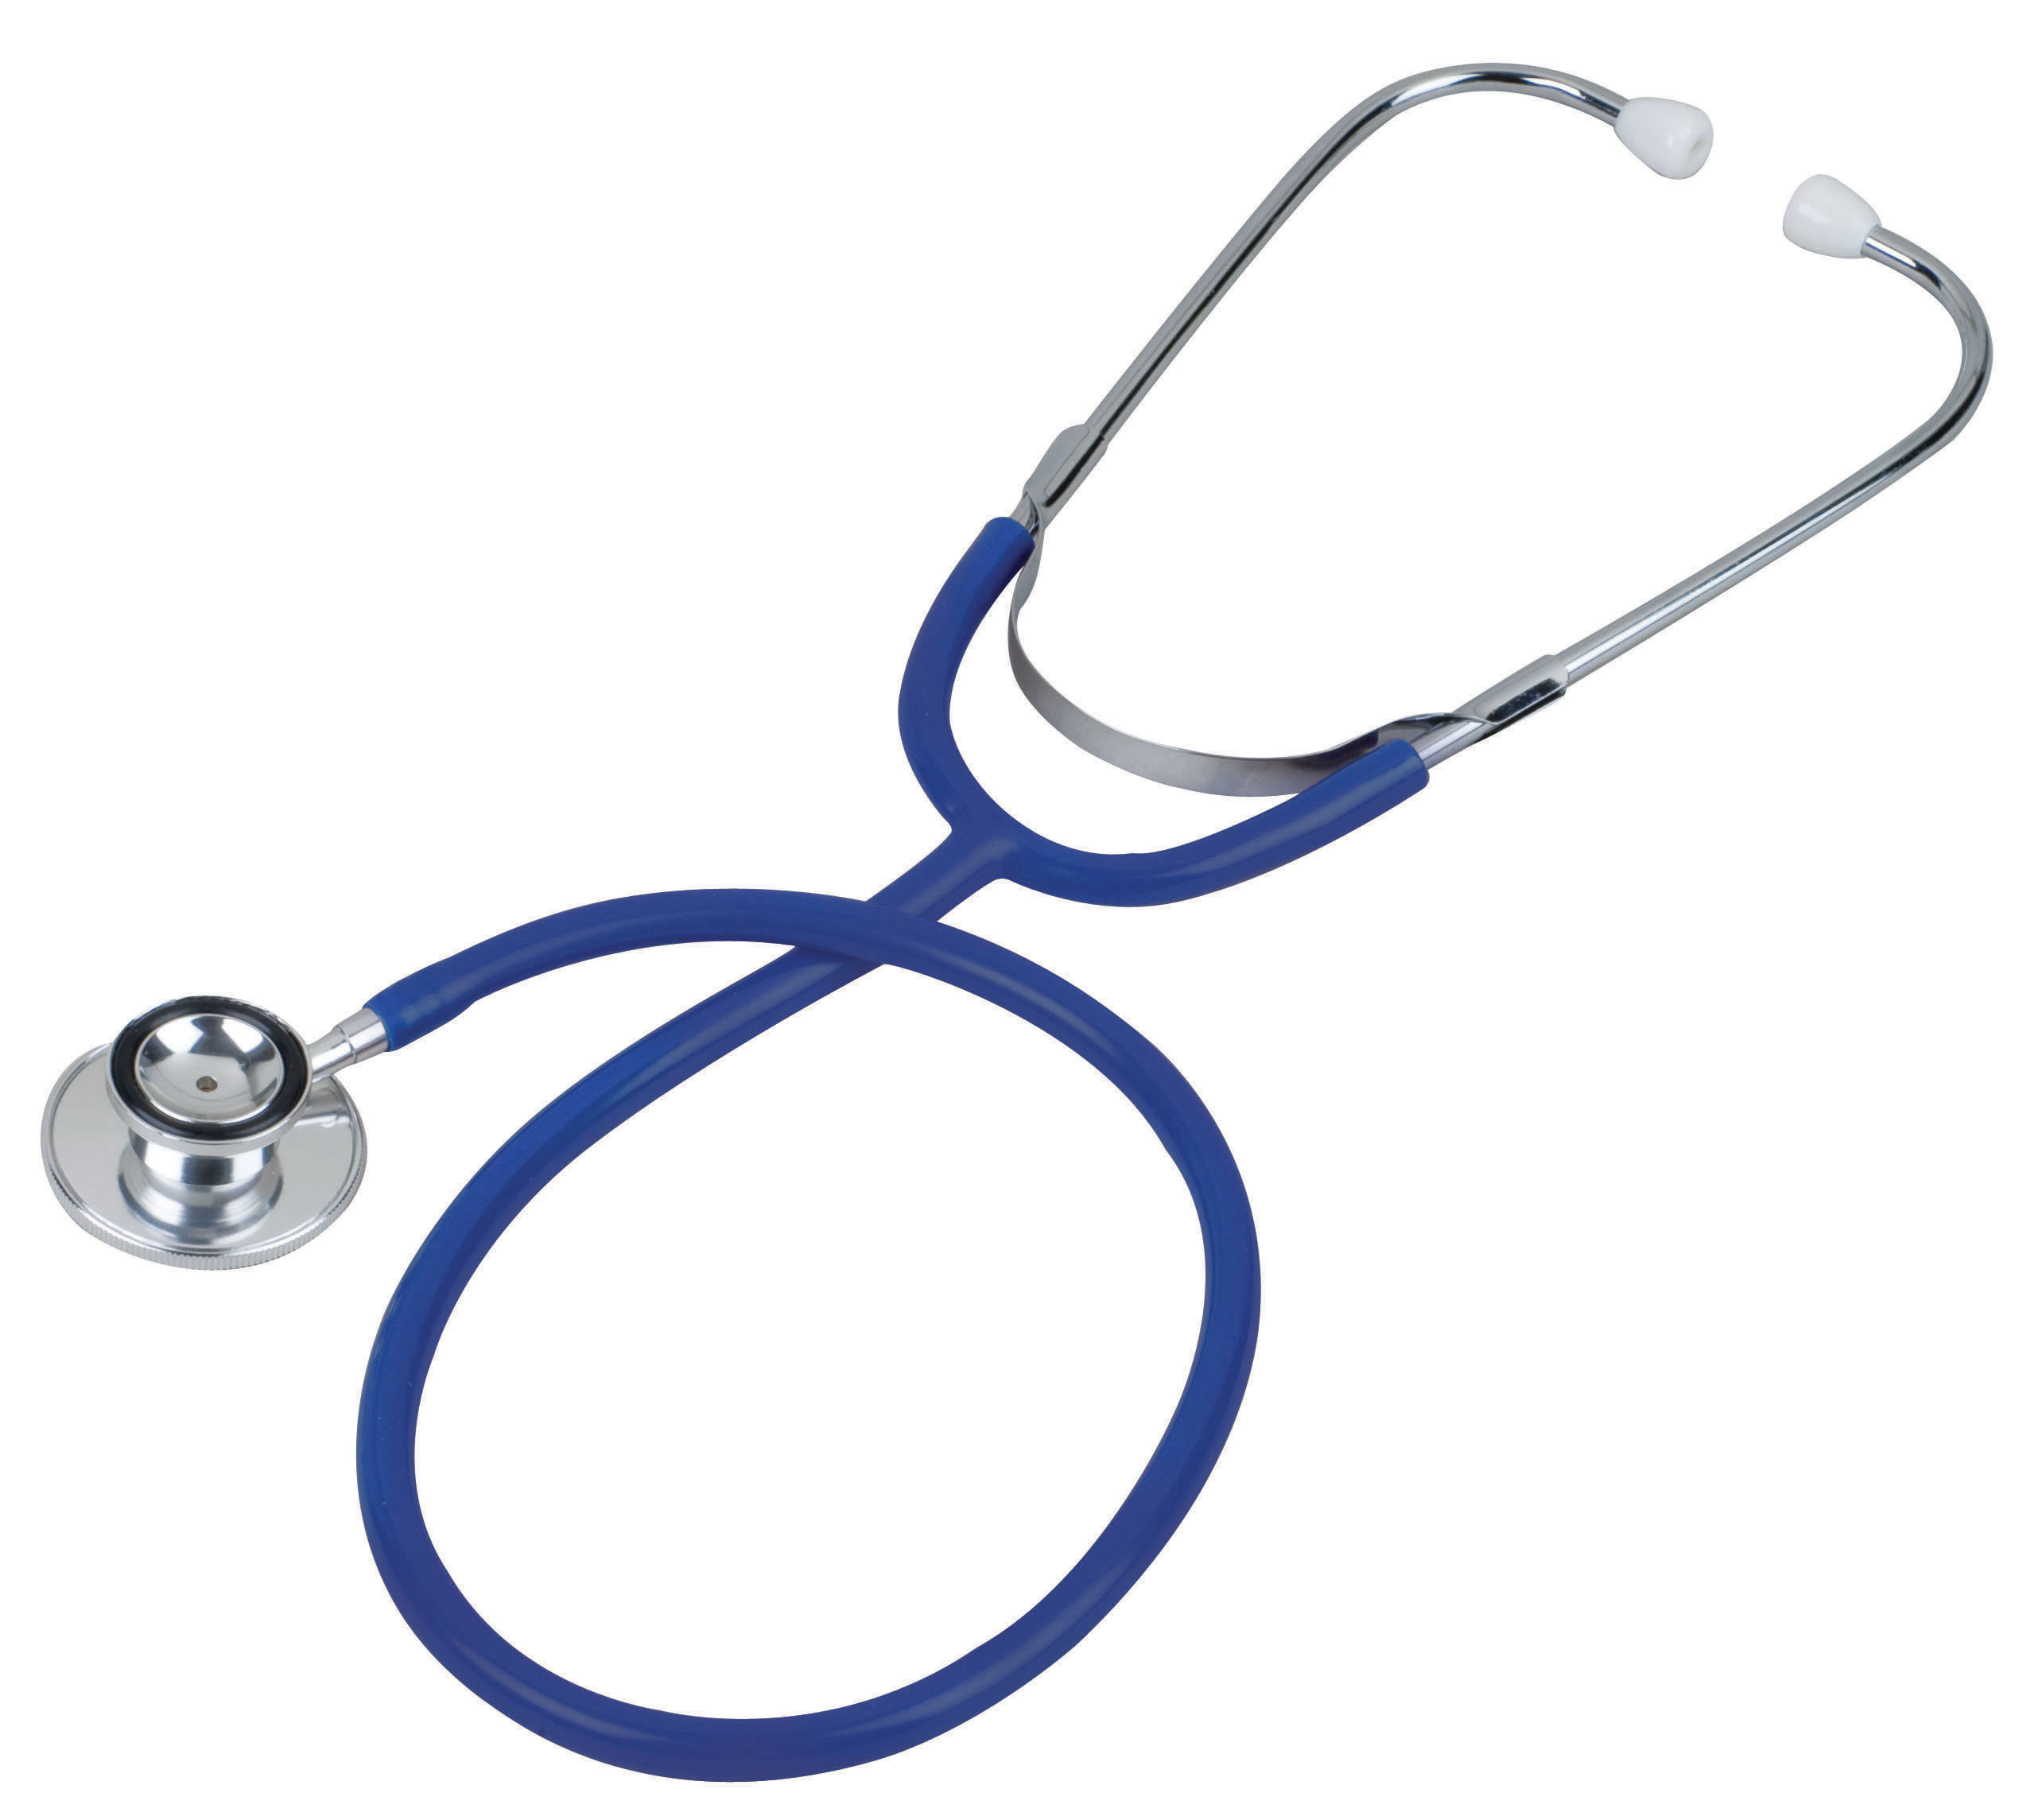 Image 65 of Stethoscope Pictures Free Clipart